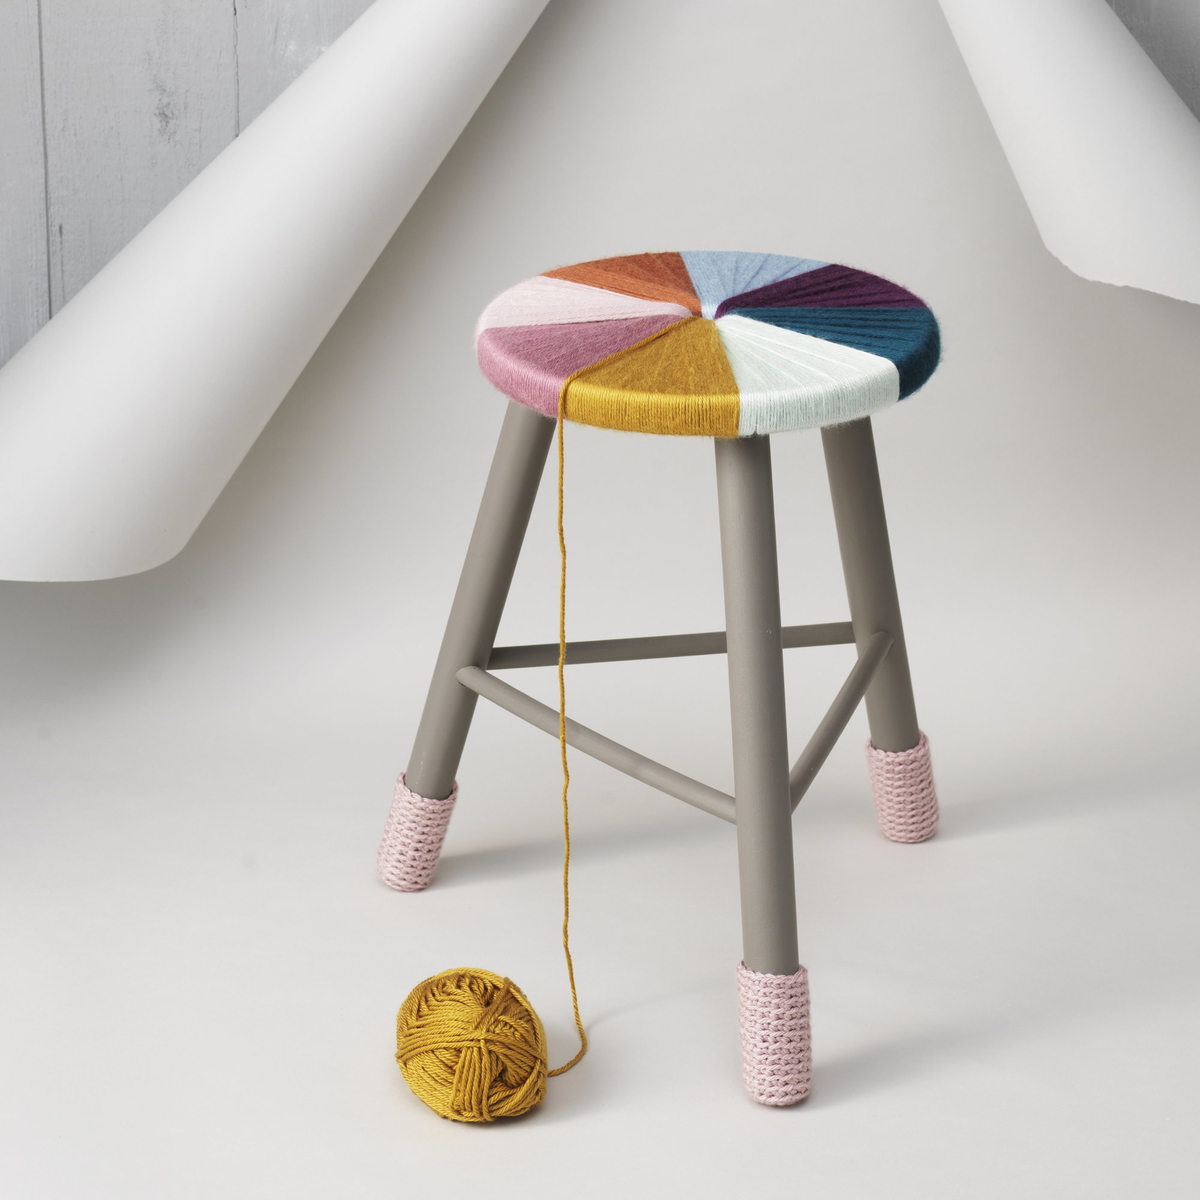 Spruce up a stool with yarn